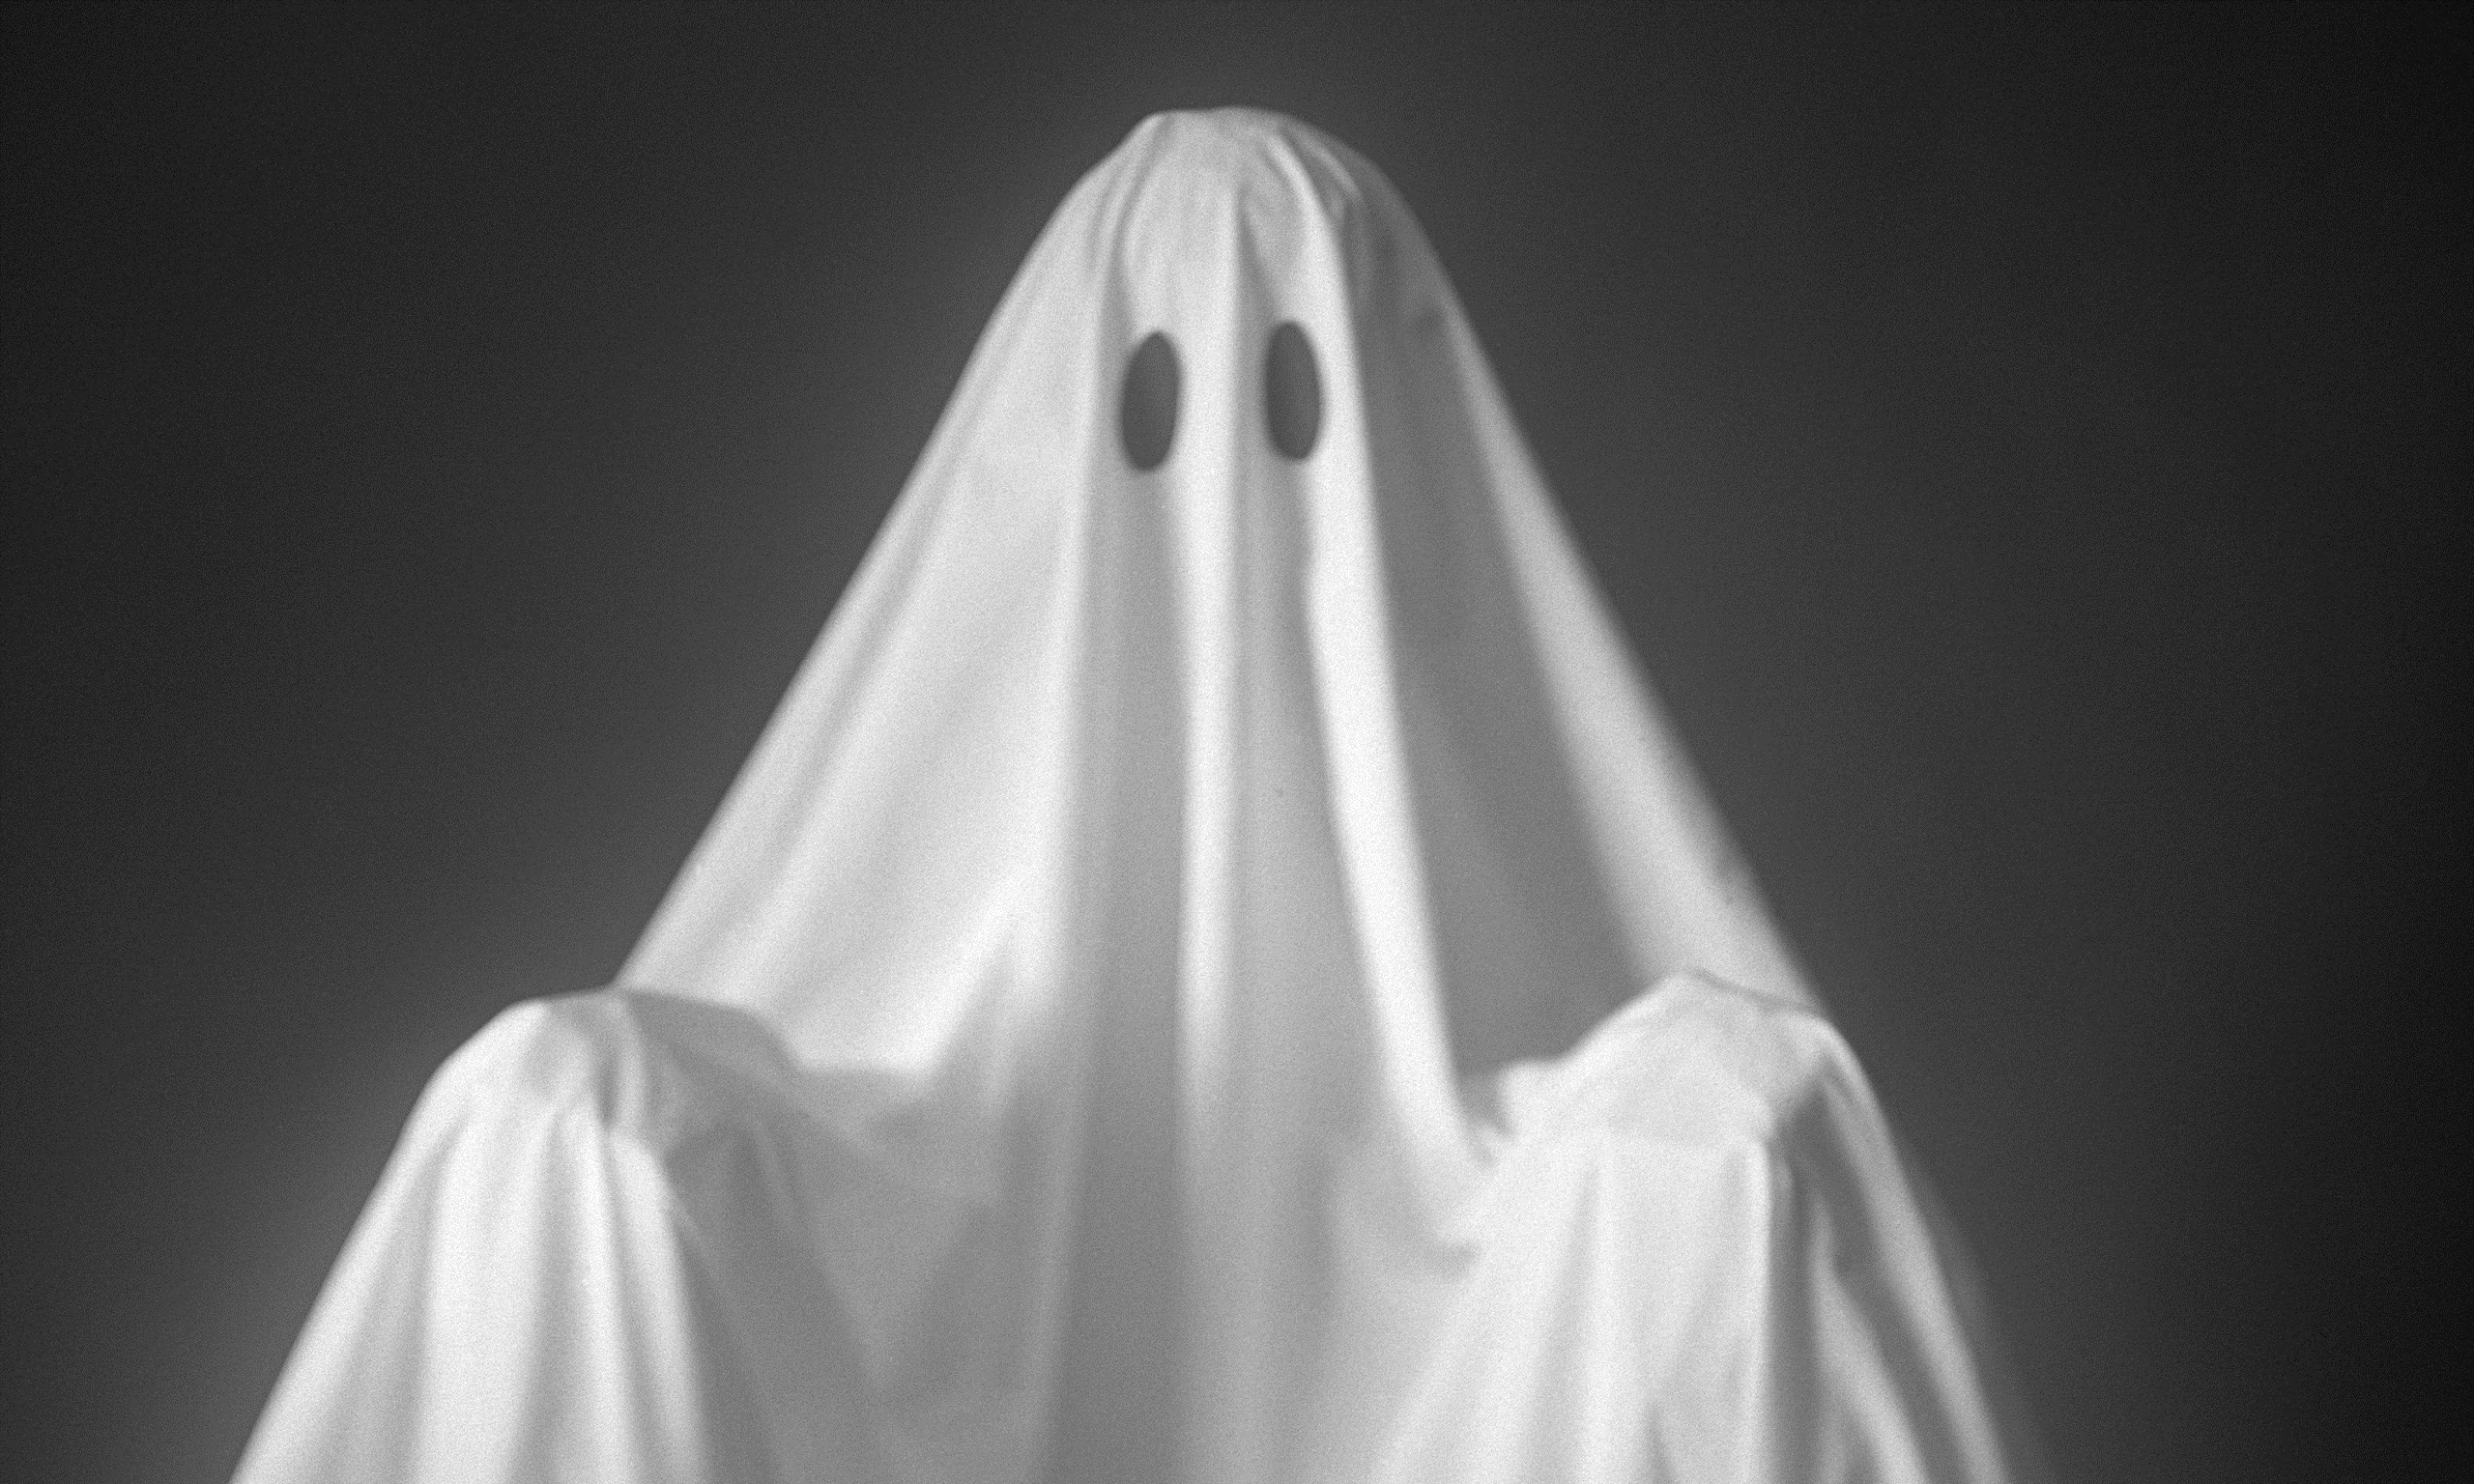 Parapsychological Association Research Endowment. Think ghosts are stupid? Then you might get $5,000! This scholarship is for college freshmen through grad students who are researching parapsychological phenomena and looking to contribute to the scientific understanding of why the credulous believe in “paranormal” phenomena.